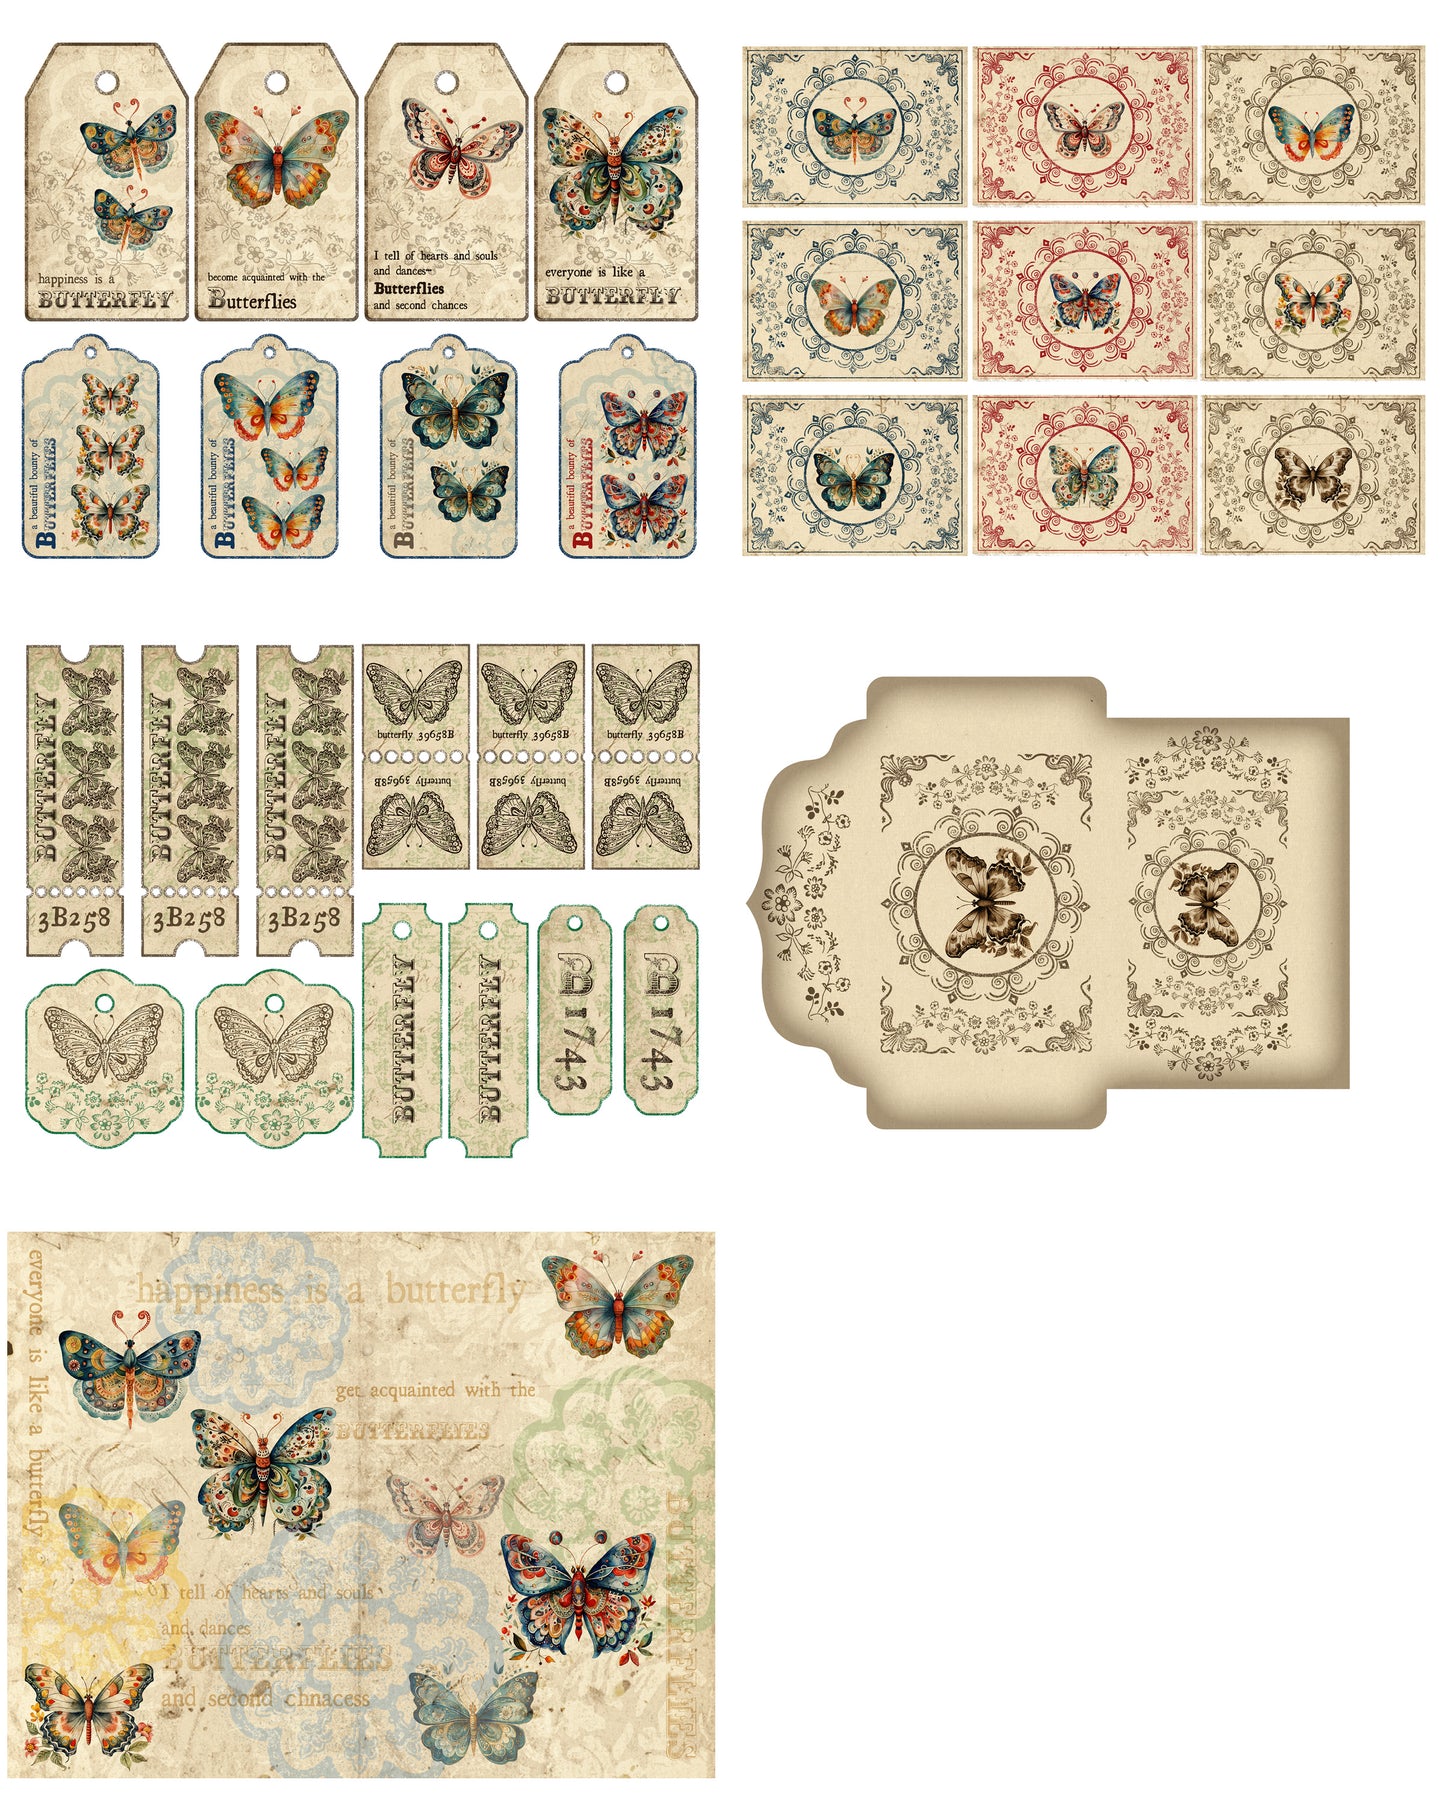 Boho Butterflies Digital Journal Kit - PDF only, Papers, Printables, Butterfly, Vintage, Papers For Crafts, Scrapbook, Junk Journal